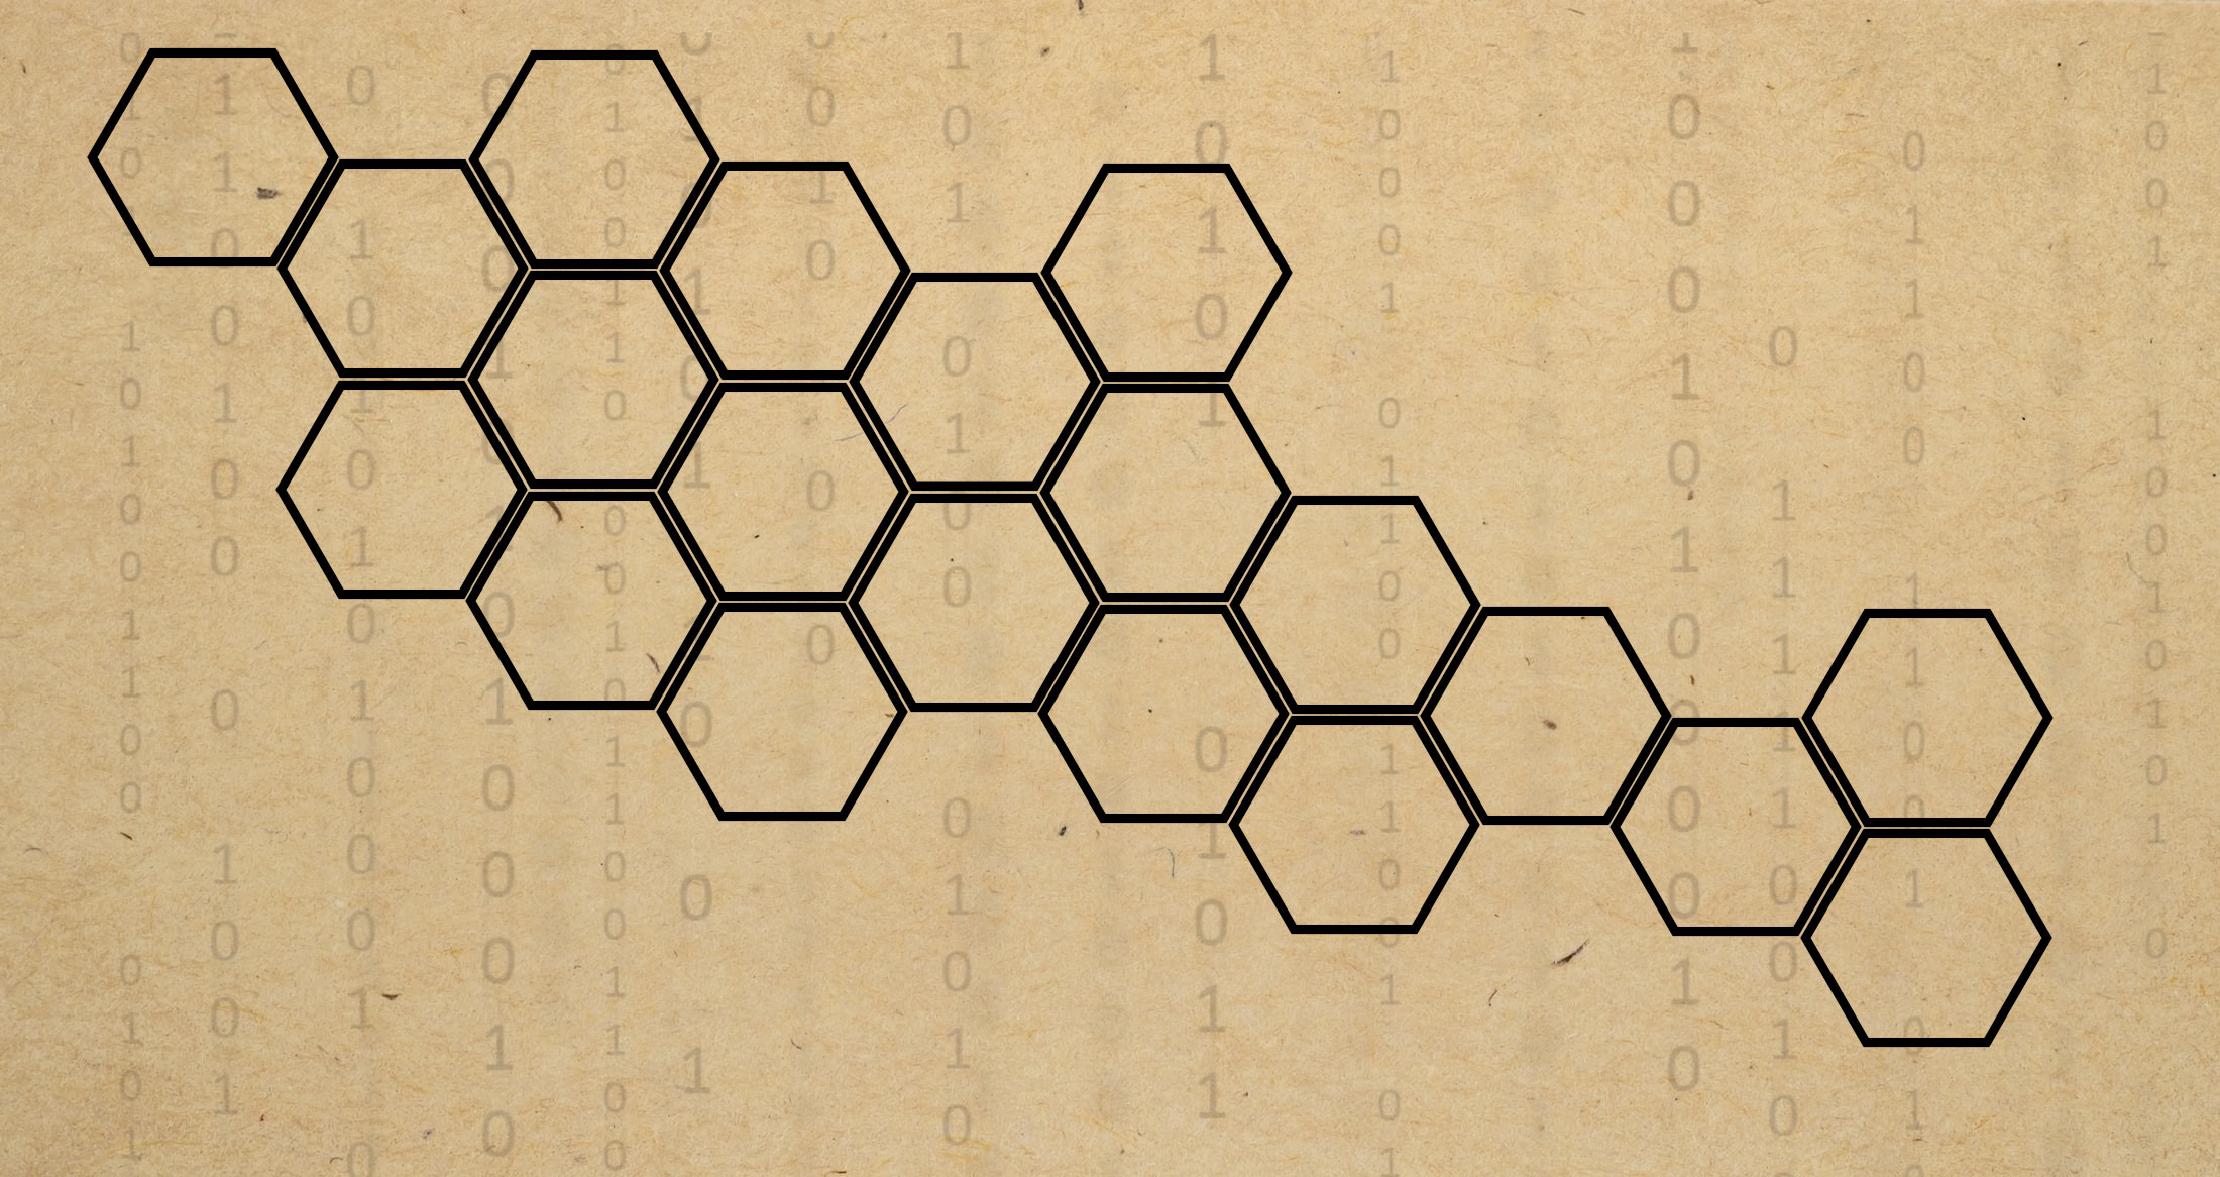 Thumbnail Hexagons over a background of binary digits.